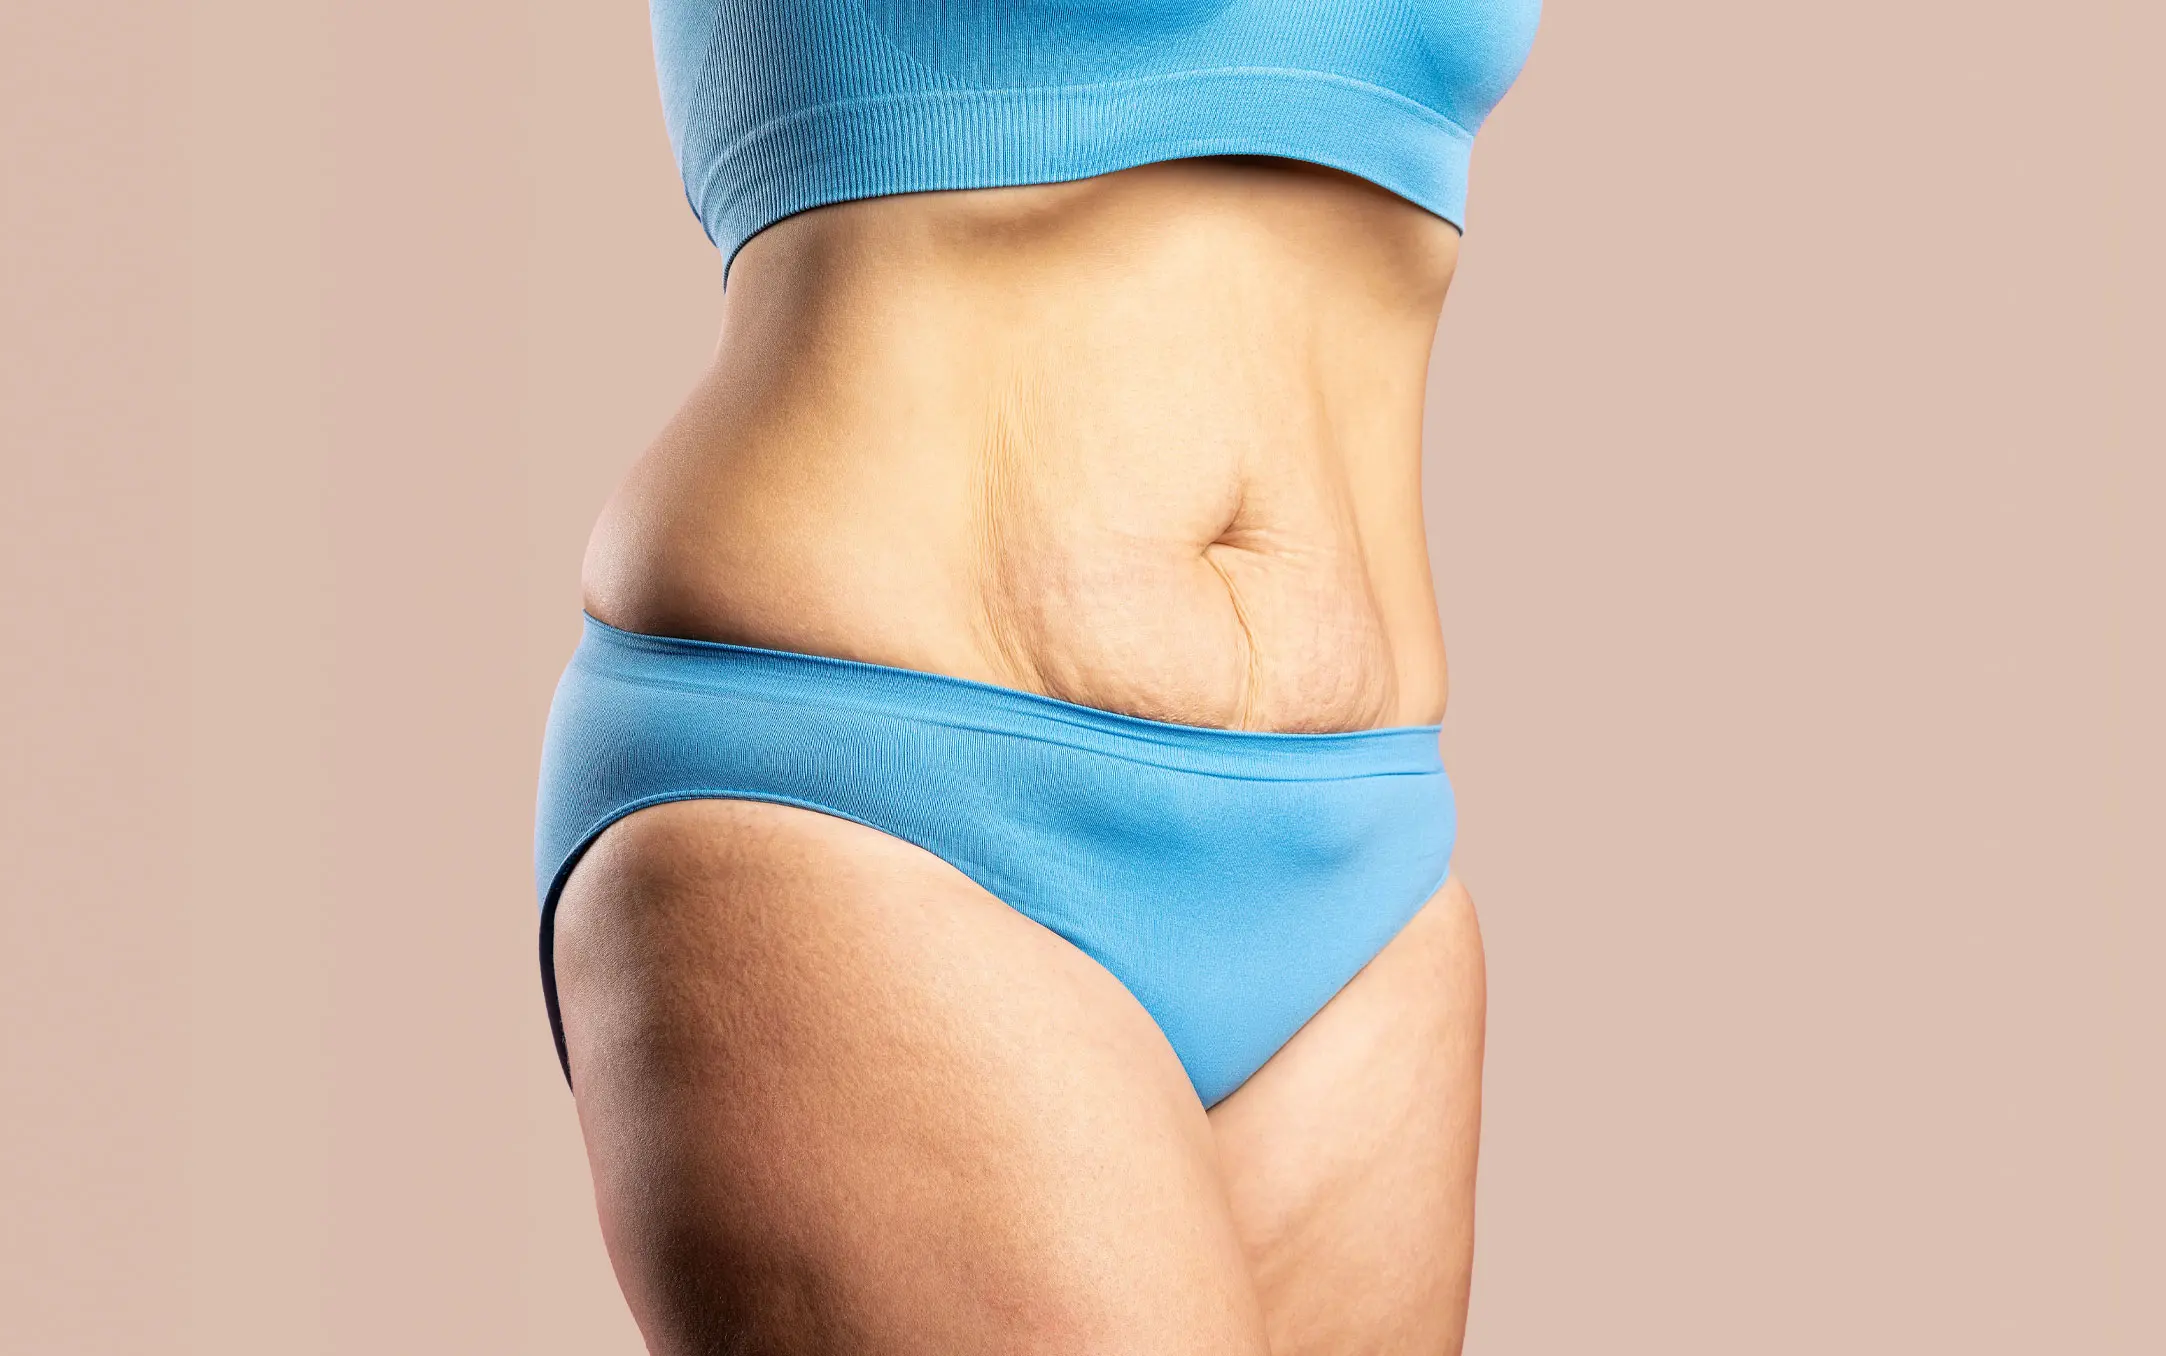 Body Lift Surgery, Remove Sagging or Drooping Skin